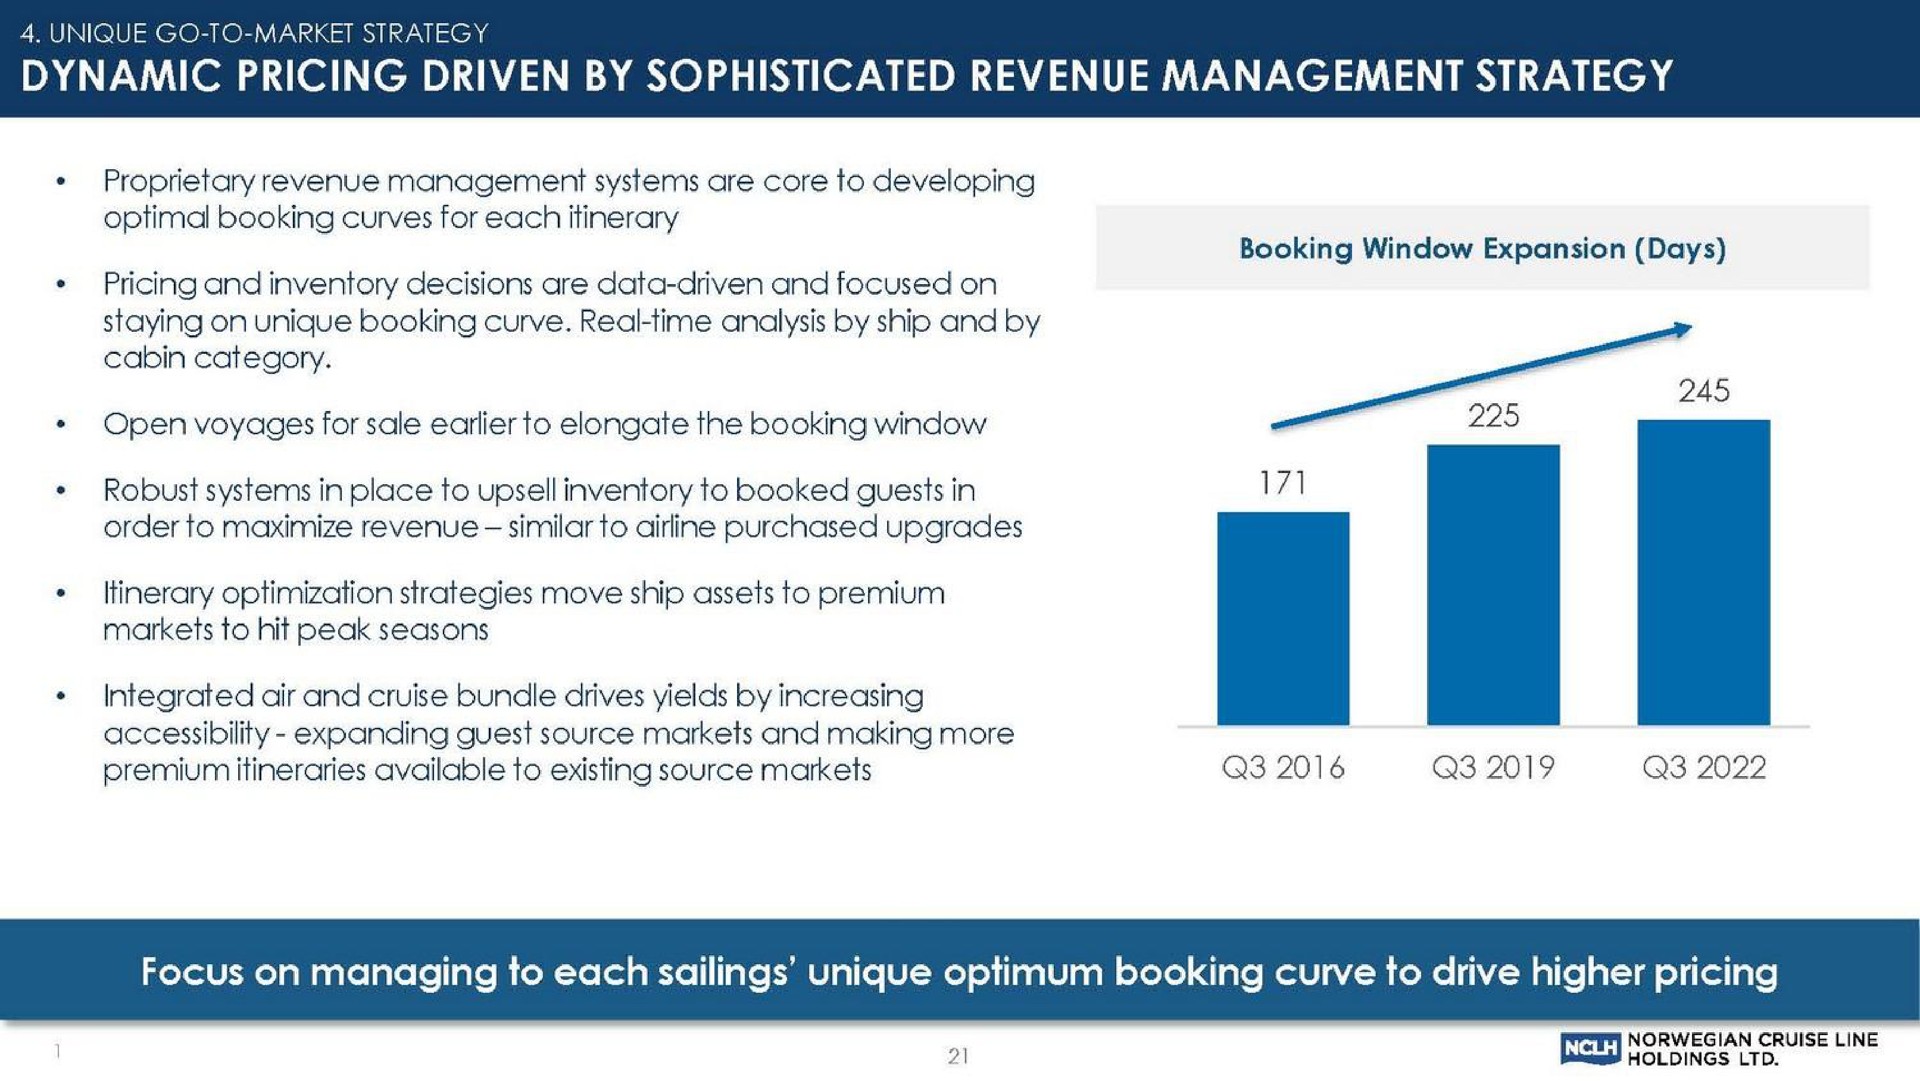 dynamic pricing driven by sophisticated revenue management strategy | Norwegian Cruise Line